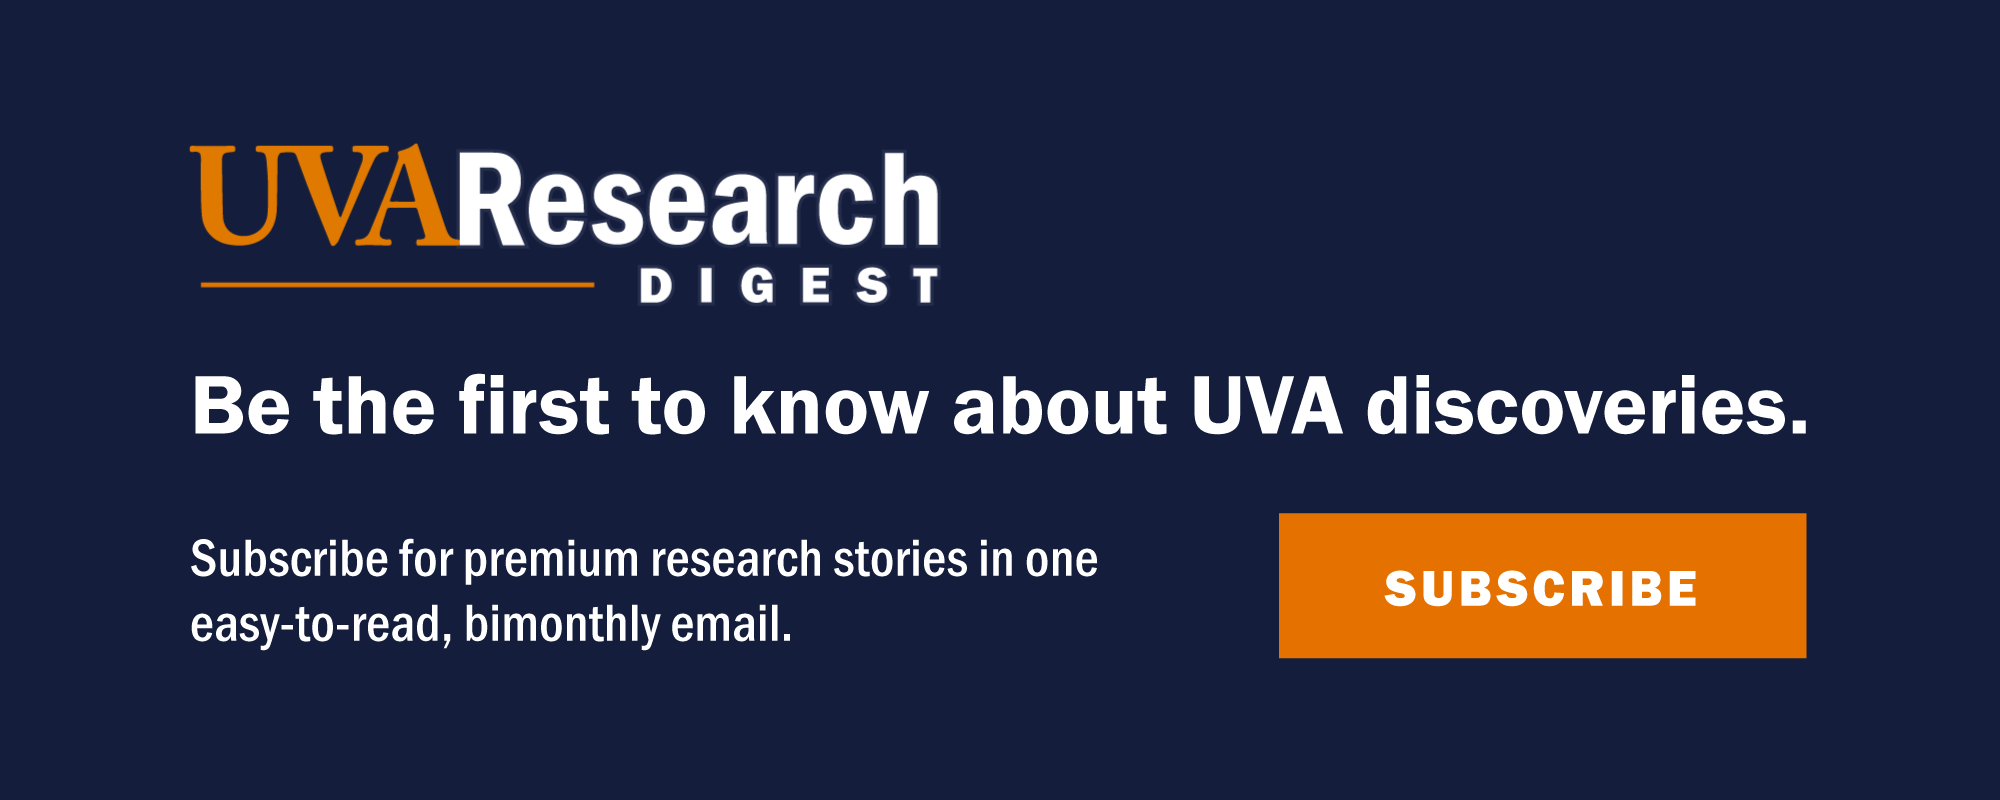 UVA Research Digest: Be the first to know about UVA discoveries. Subscribe for premium research stories in one easy-to-read, bimonthly email.